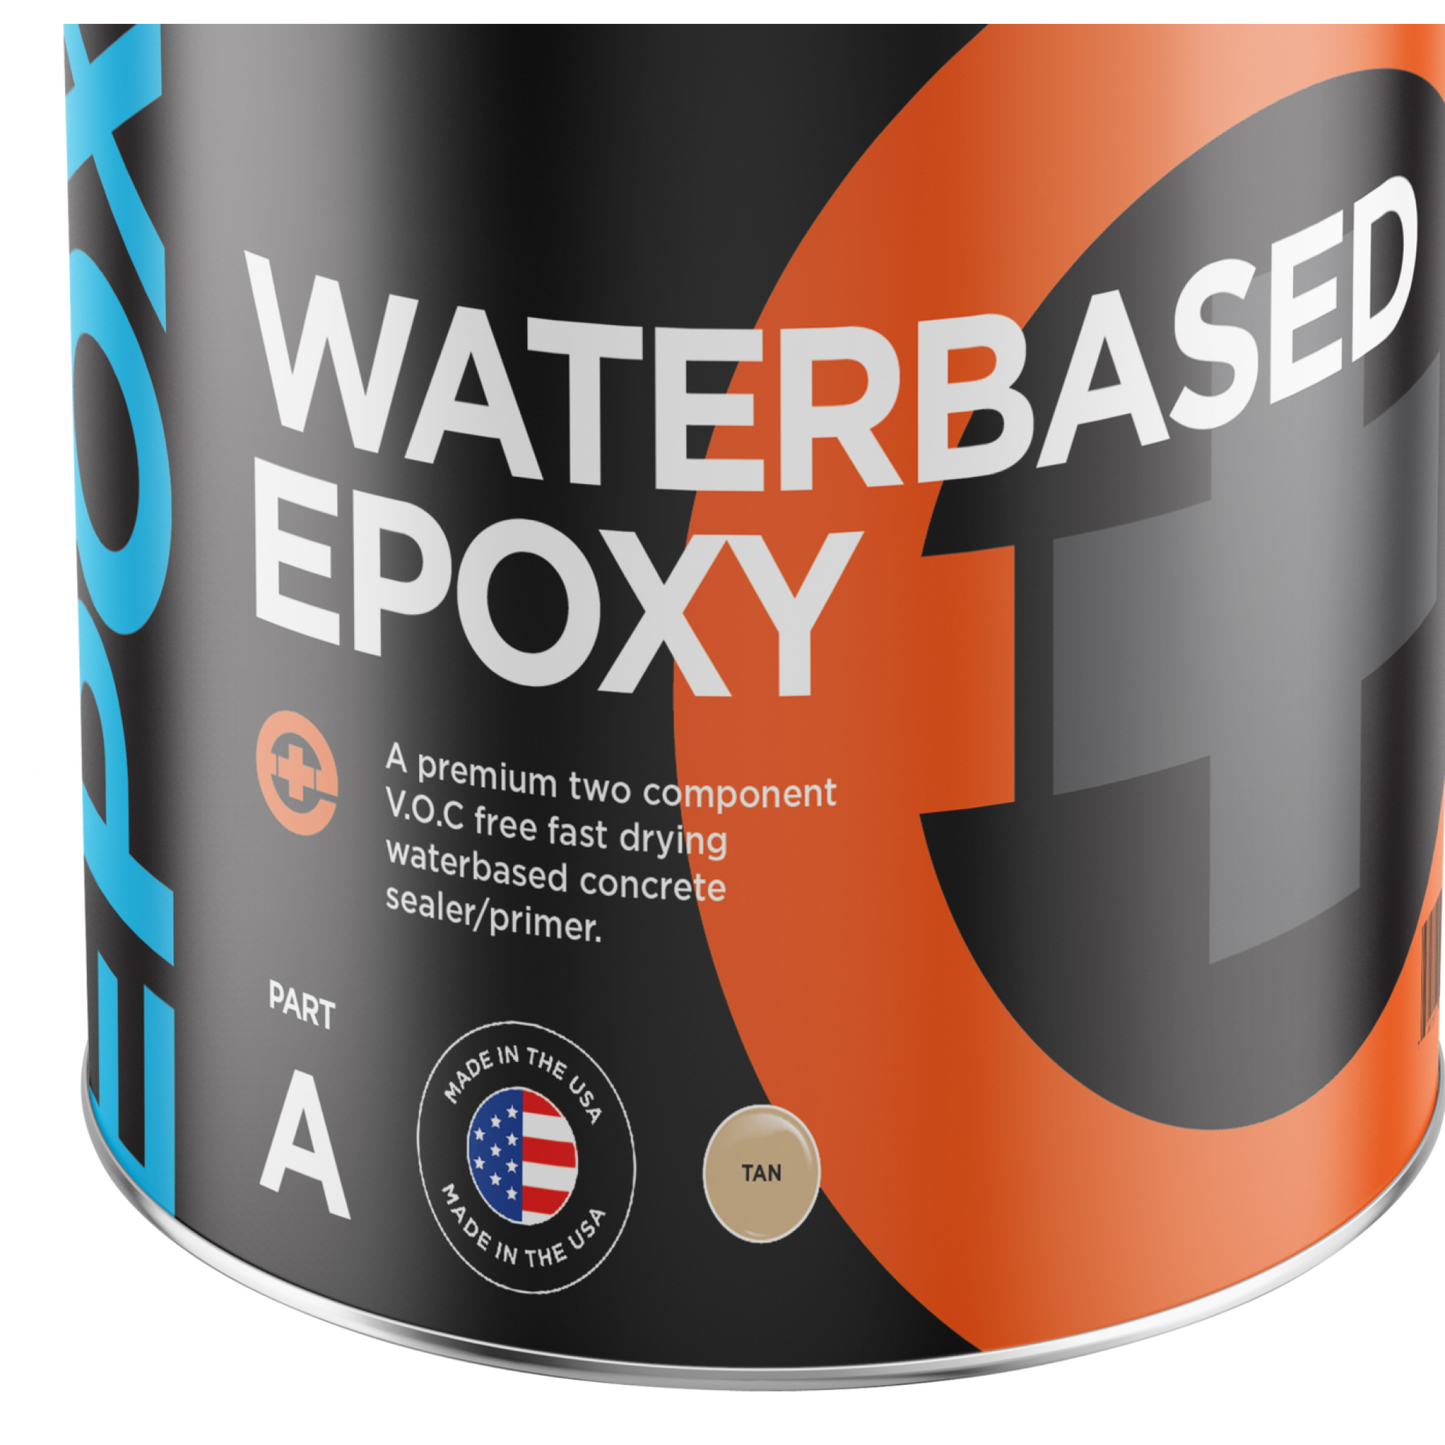 Durability Meets Convenience: 1.25 Gal Kit of Tan Water-Based Epoxy (400-500sf Coverage)